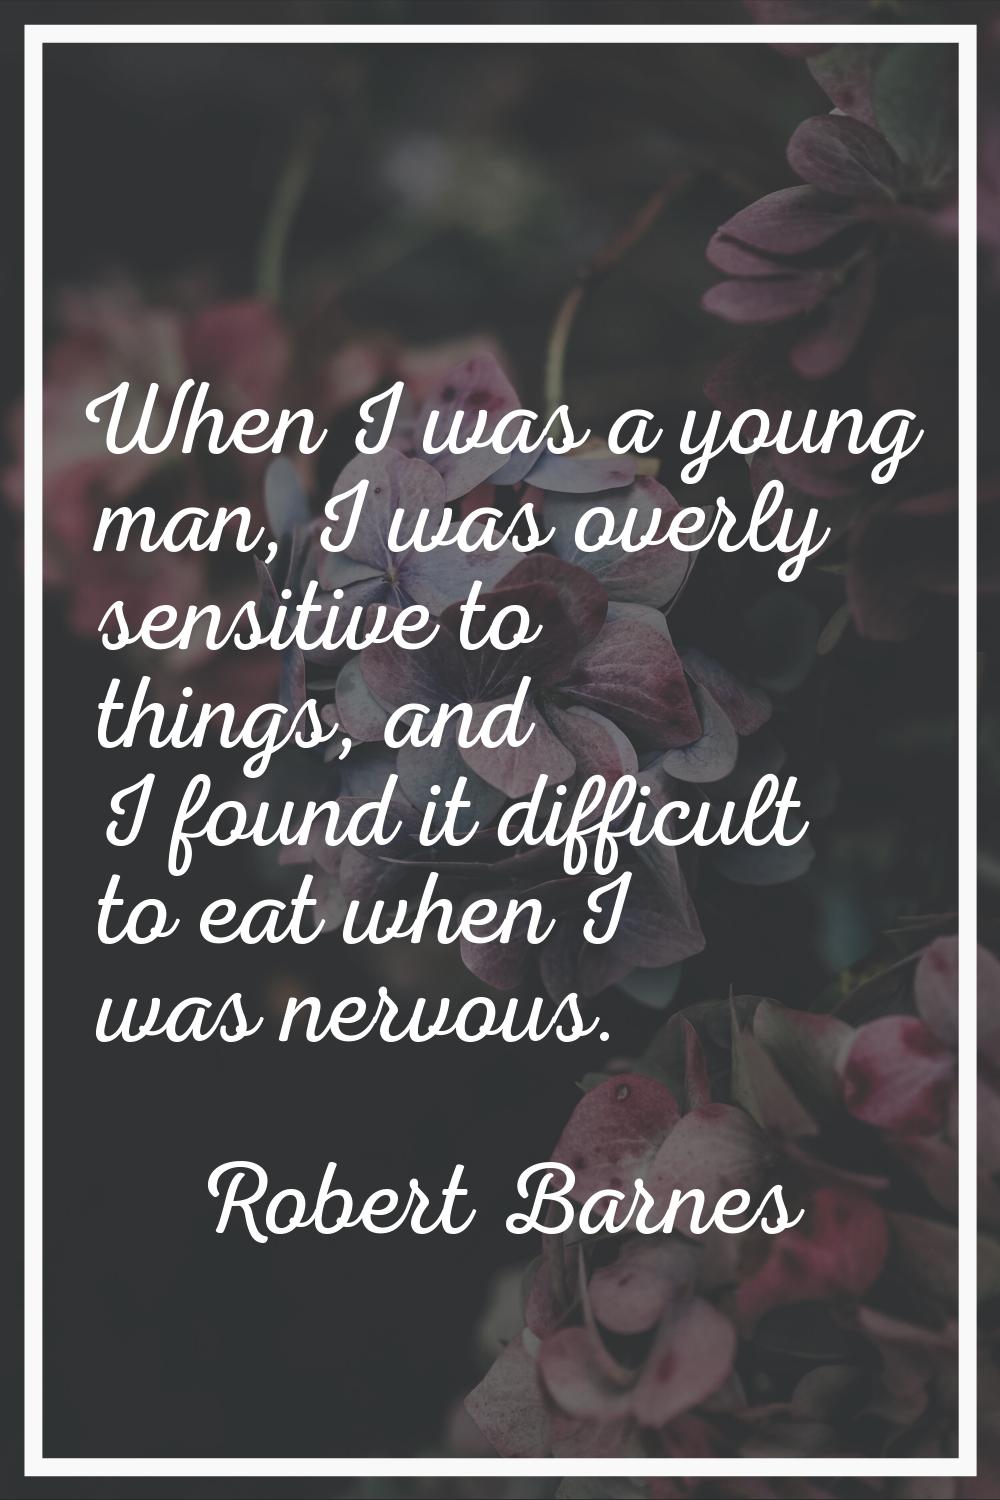 When I was a young man, I was overly sensitive to things, and I found it difficult to eat when I wa